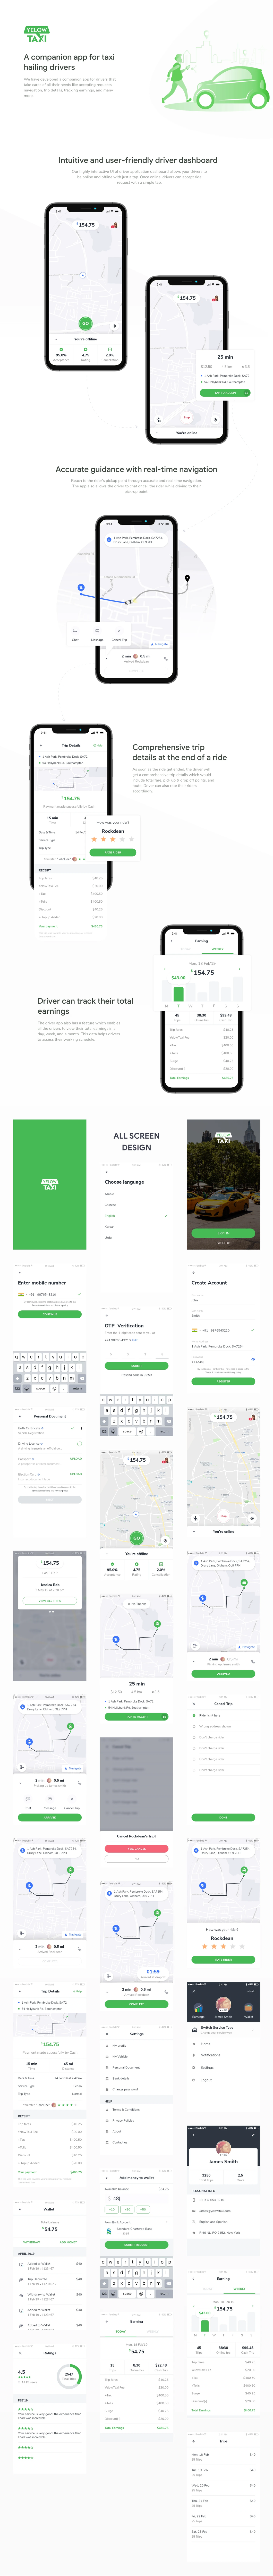 Yelow Taxi Driver App for Adobe XD